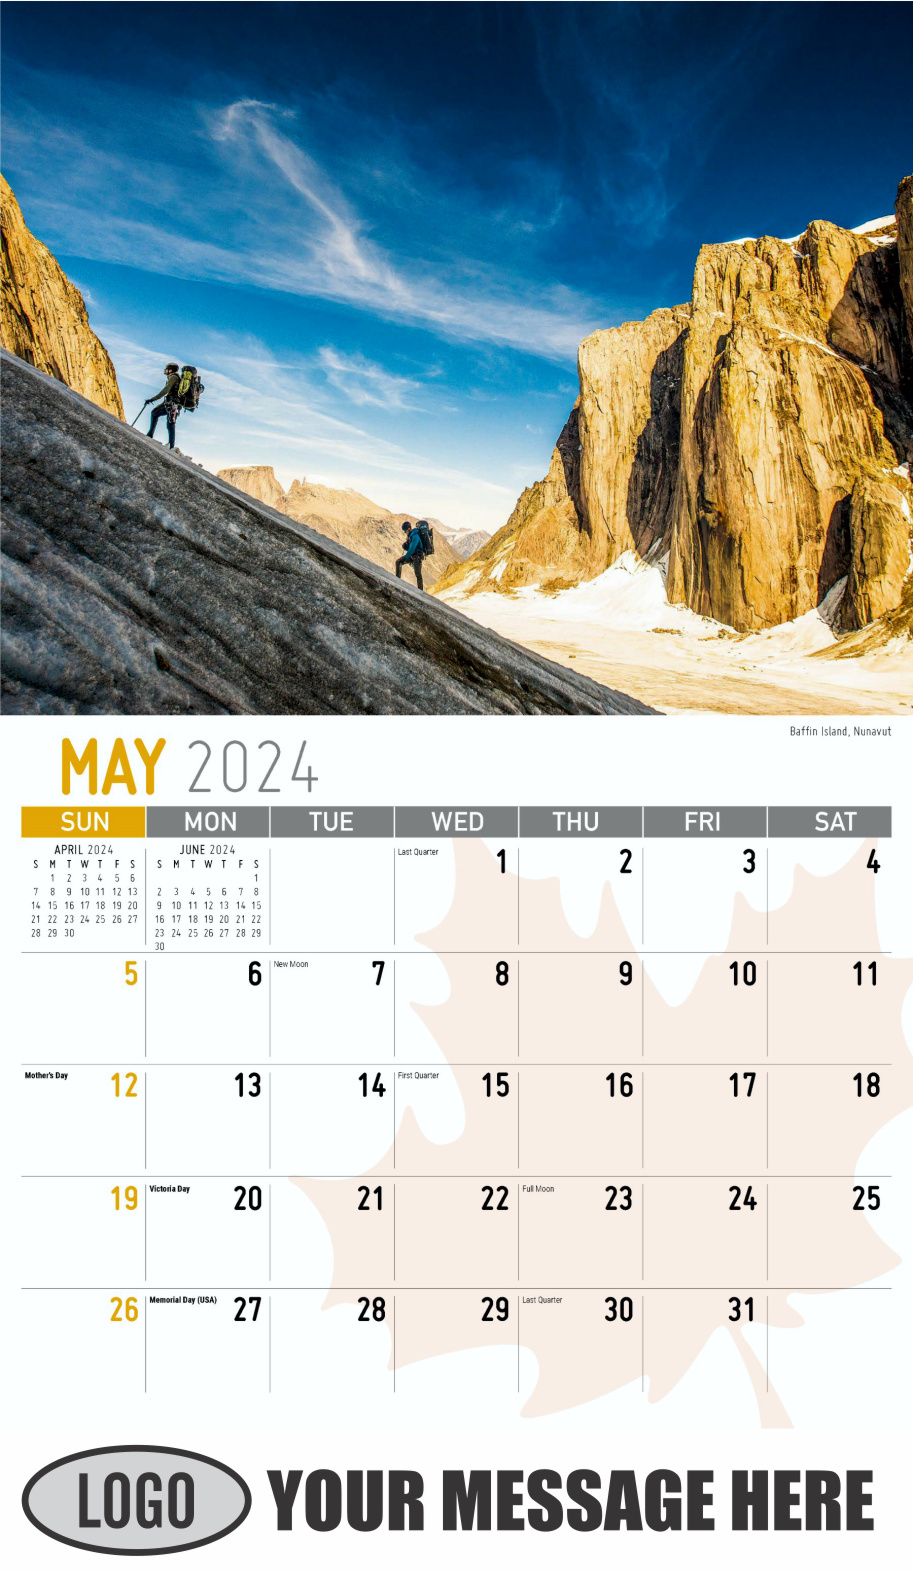 Scenes of Canada 2024 Business Promotion Wall Calendar - May